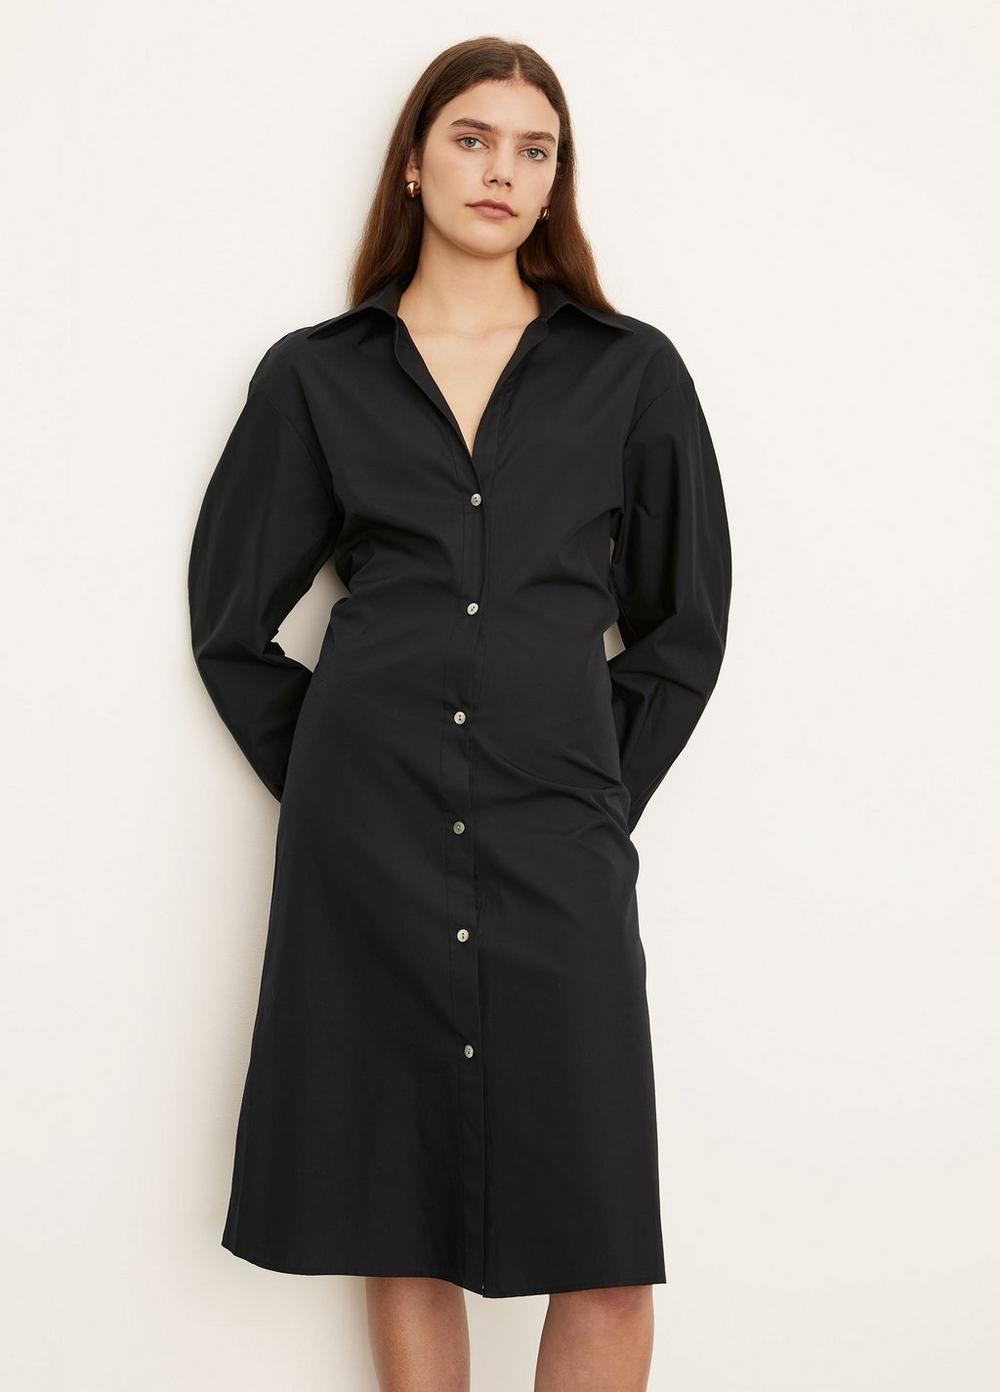 Vince | Long Sleeve Soft Fitted Shirt Dress in Coastal Blue | Vince Unfold